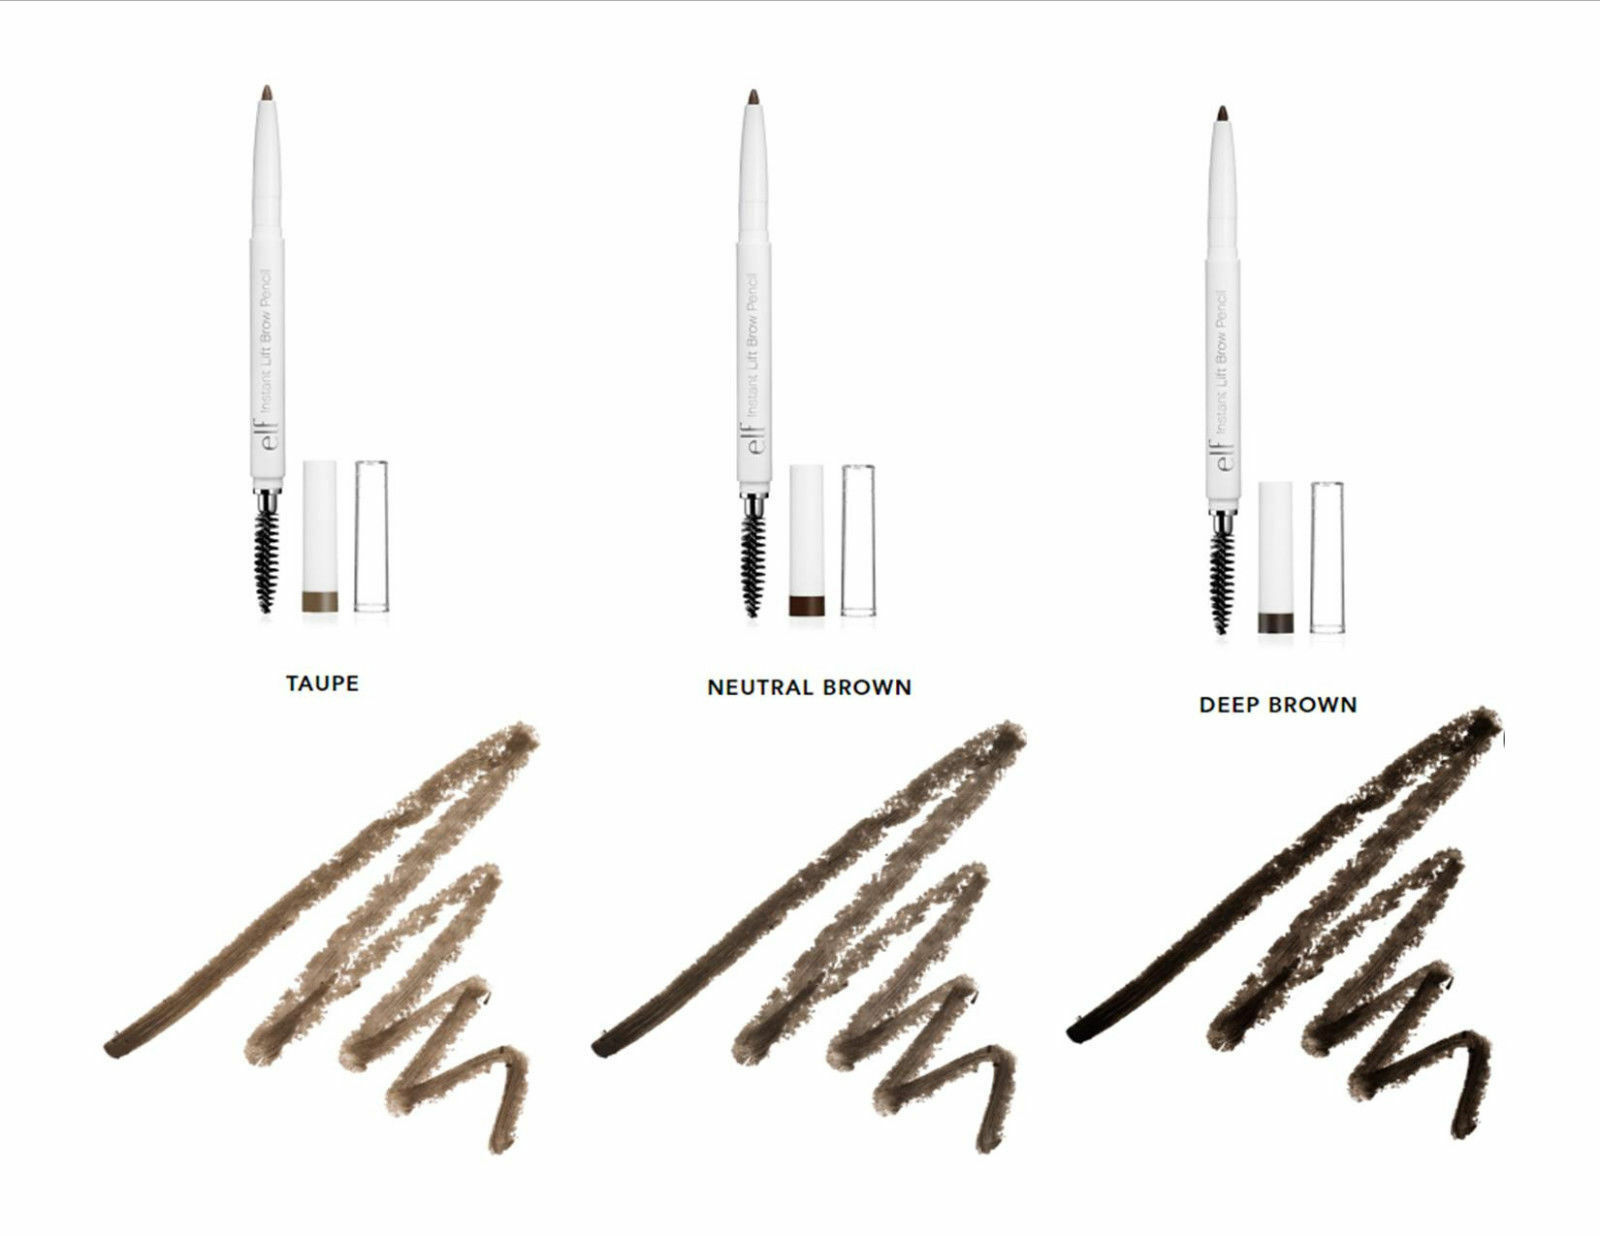 E.l.f. Instant Lift Brow Pencil (taupe, Neutral Brown, Deep Brown)